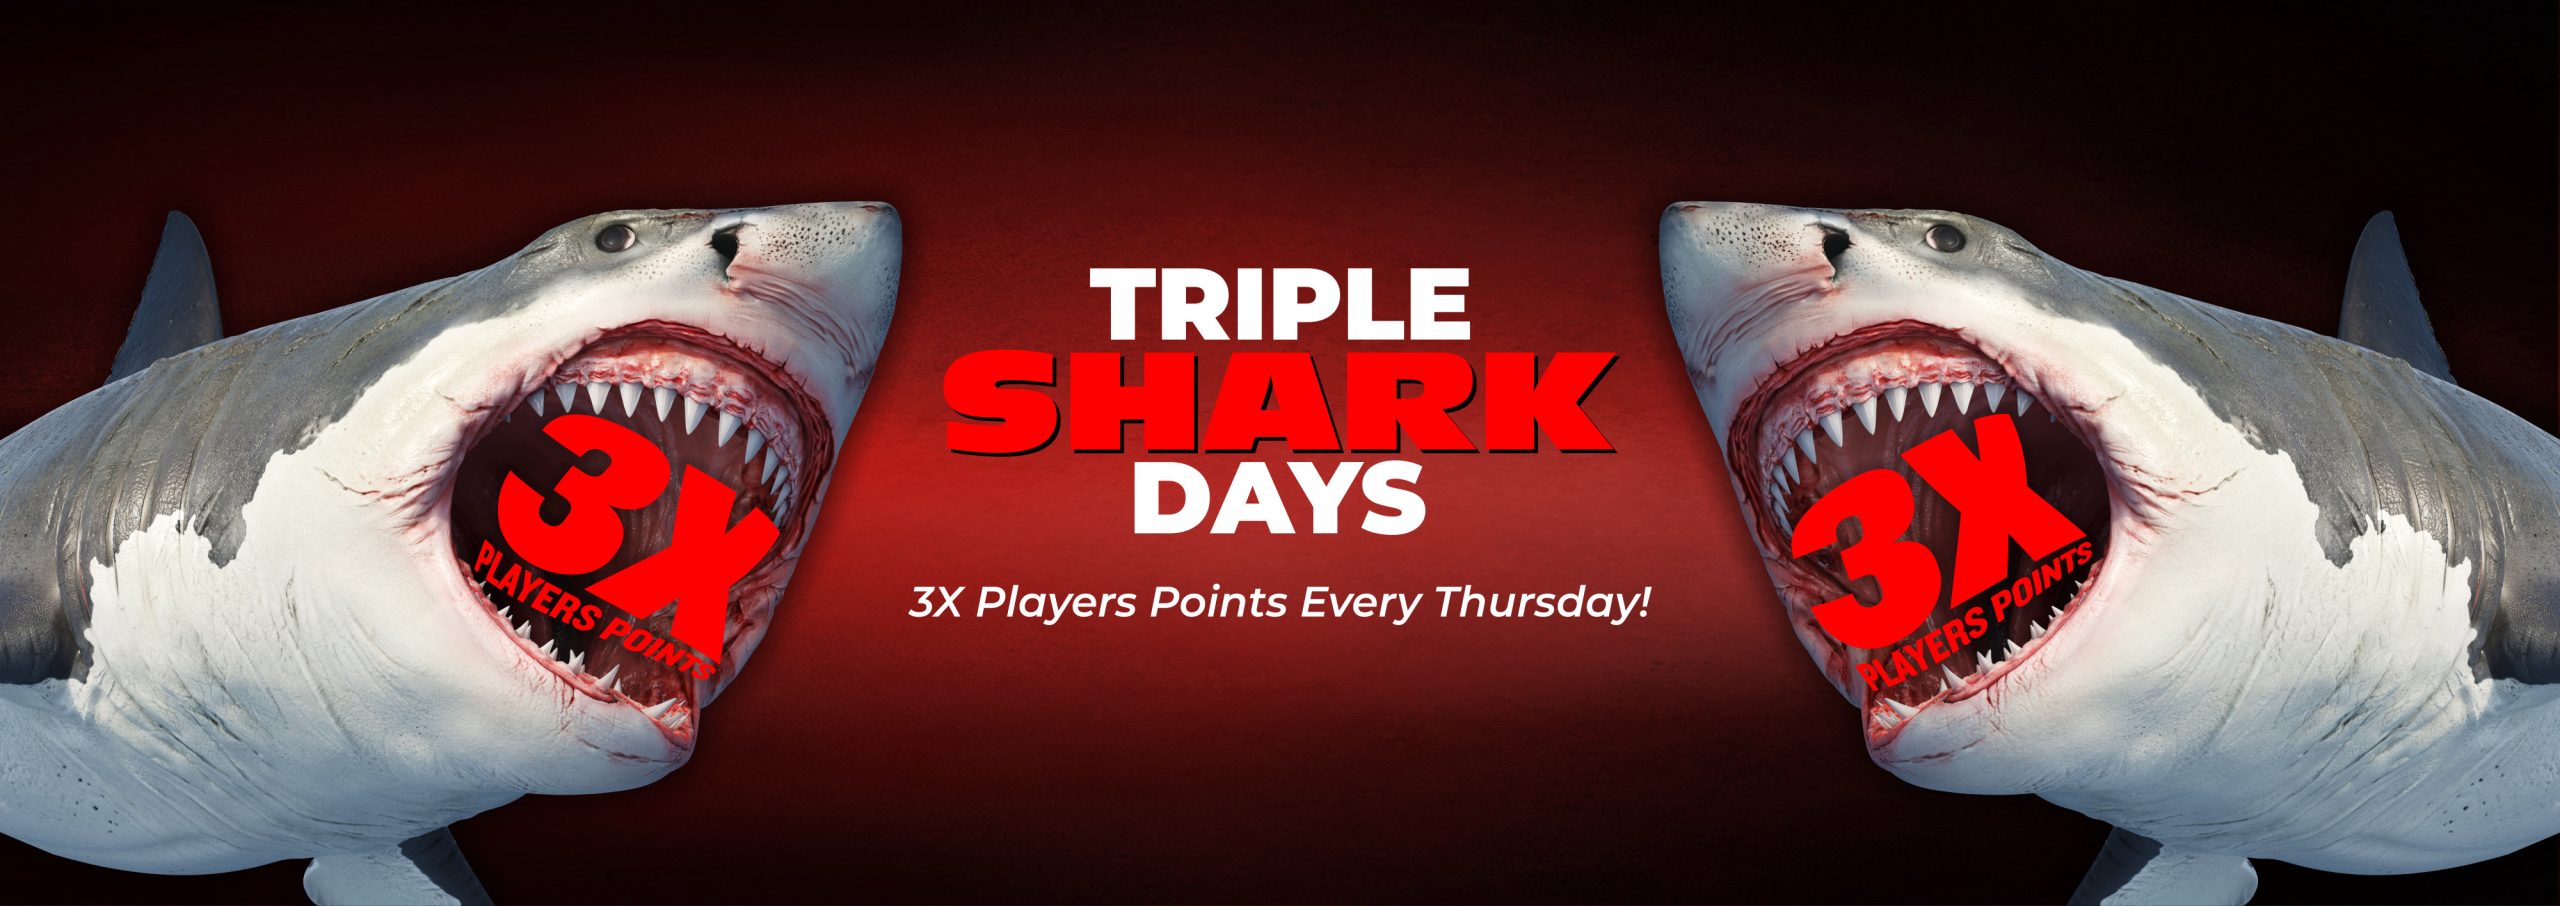 Triple Shark Days - 3 times the player points every Thursday!